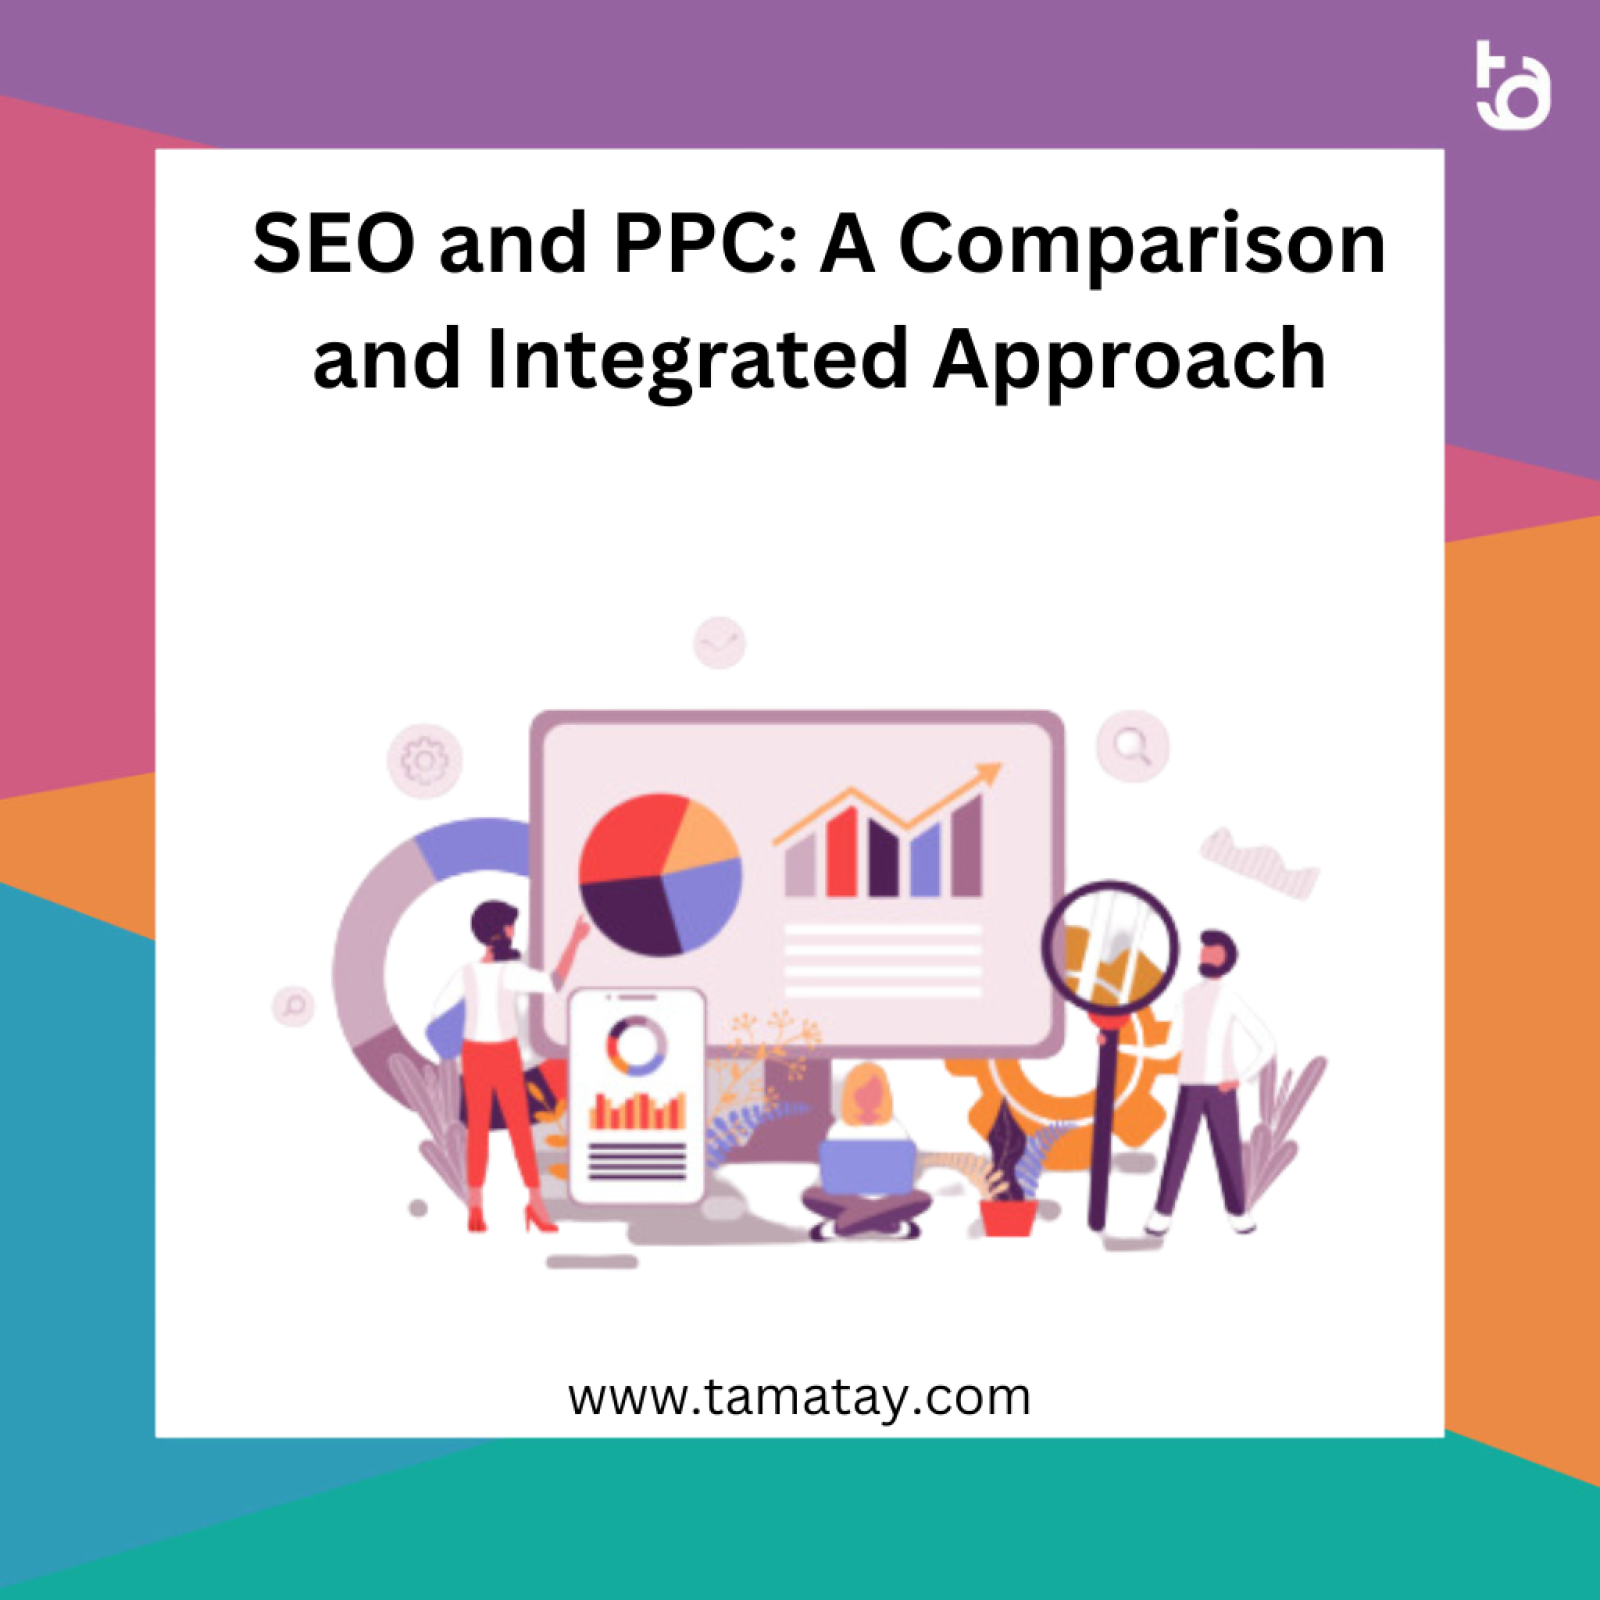 SEO and PPC: A Comparison and Integrated Approach